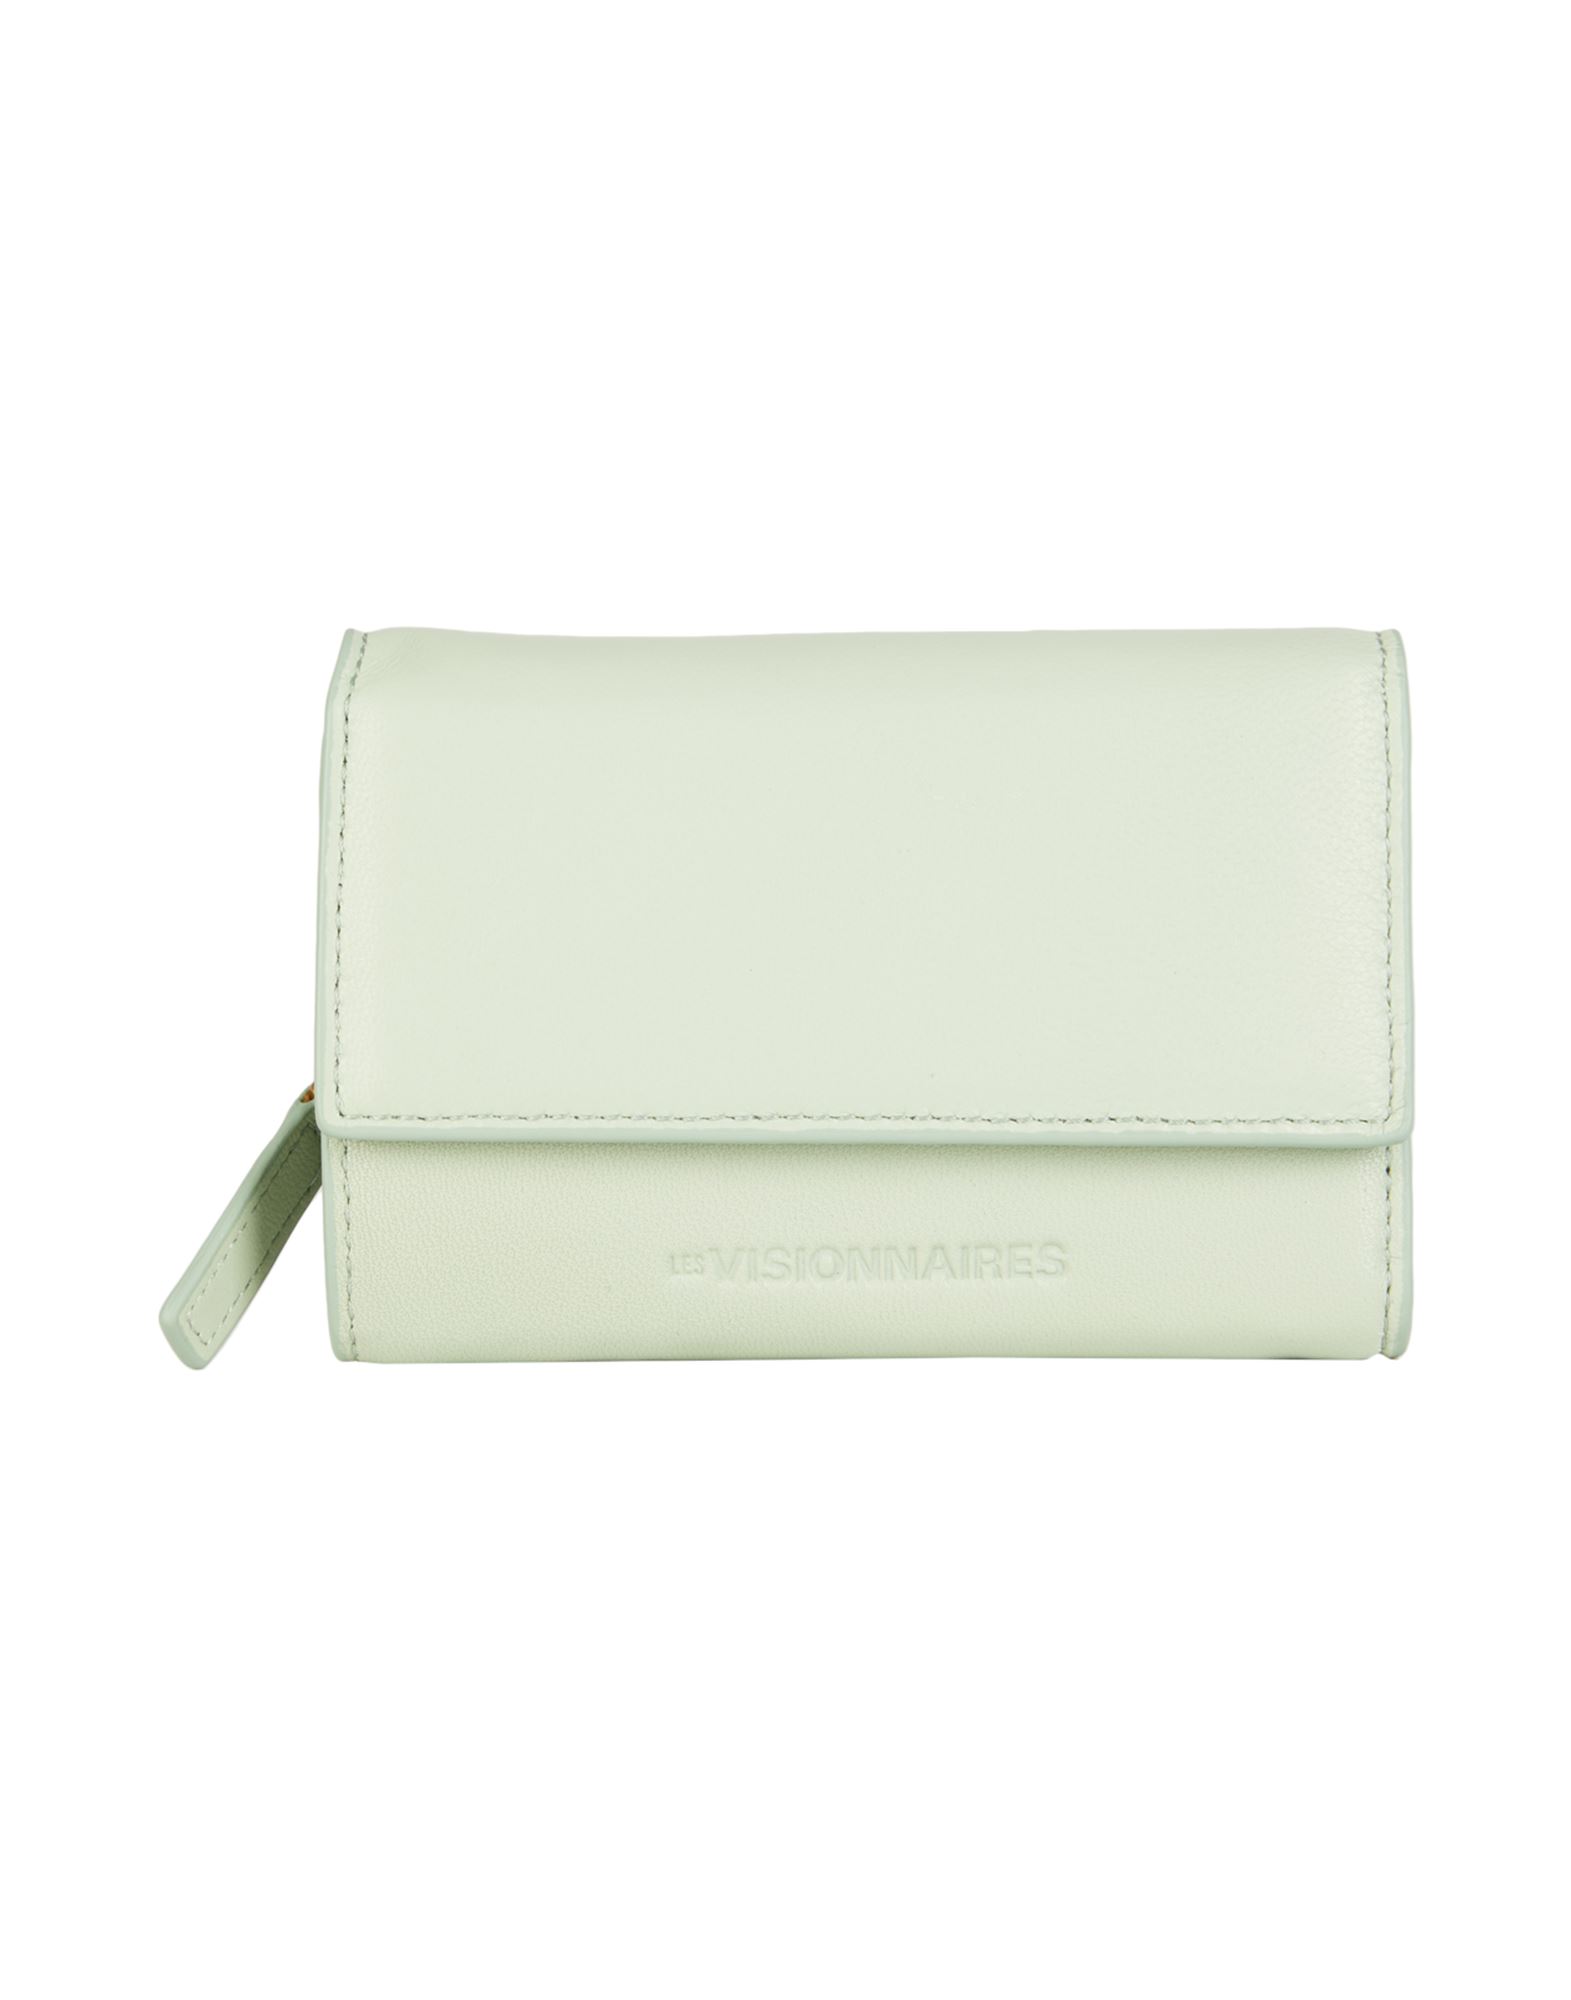 LES VISIONNAIRES LES VISIONNAIRES LISA SILKY LEATHER WOMAN WALLET LIGHT GREEN SIZE - LAMBSKIN